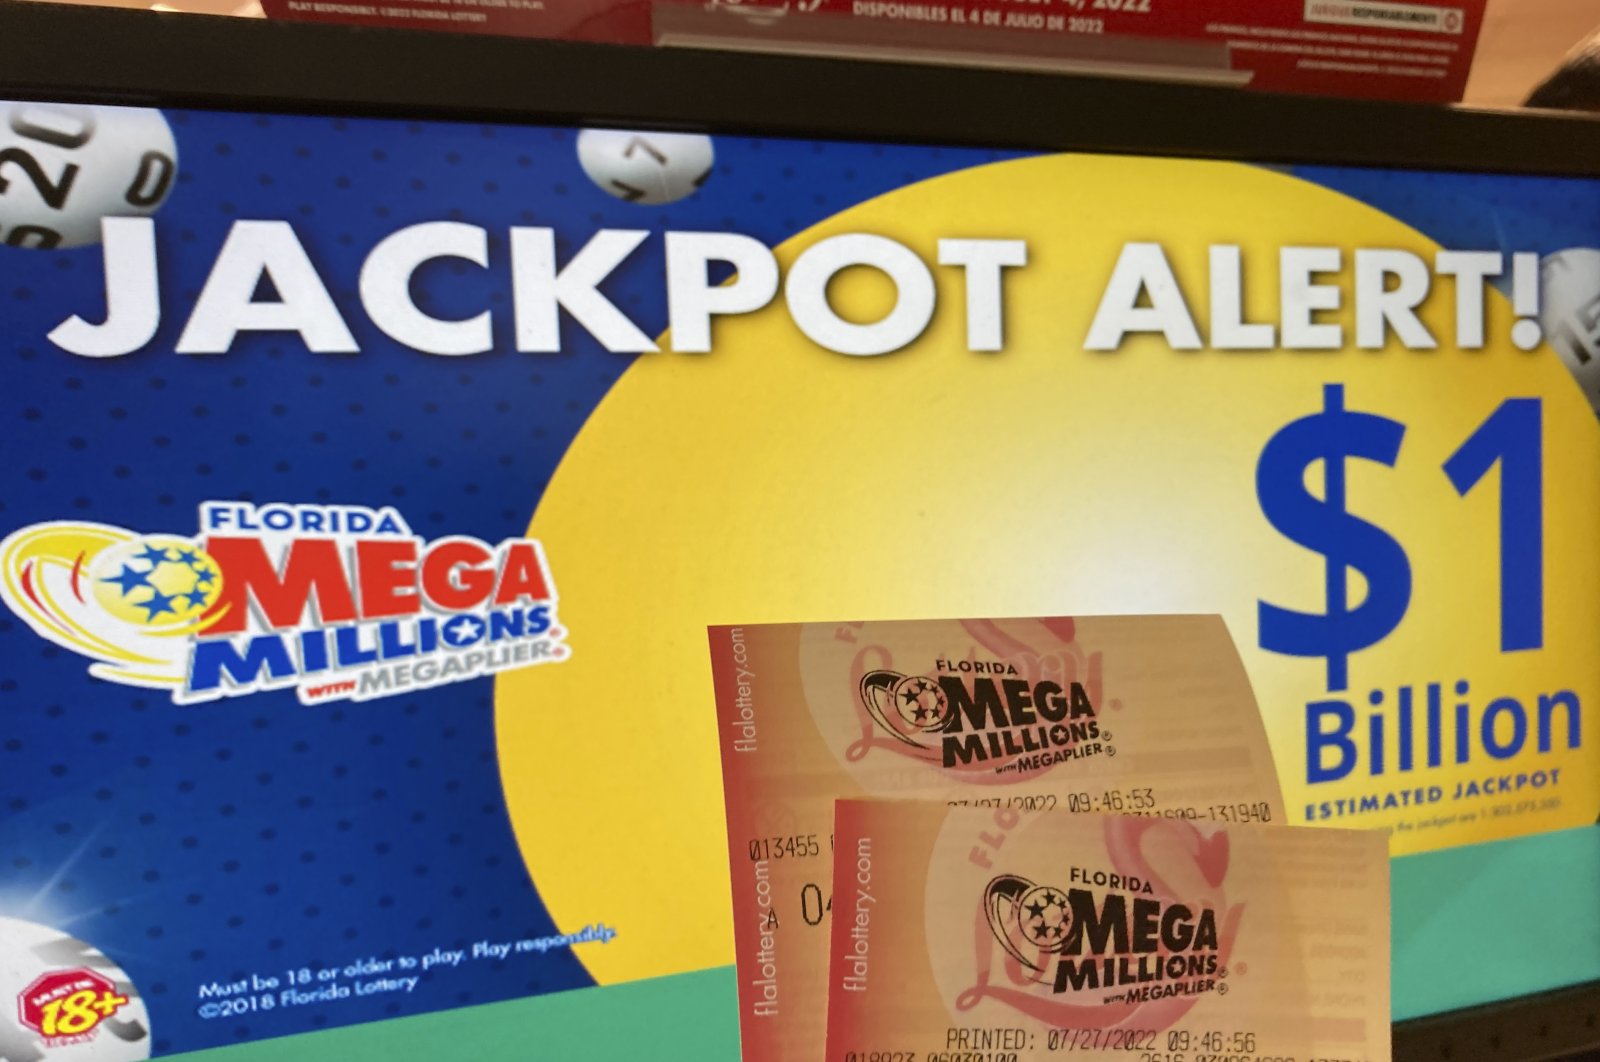 In this July 27, 2022, file photo, Mega Millions lottery tickets are shown at a lottery retailer in Surfside, Florida. A giant Mega Millions lottery jackpot ballooned to over $1 billion after no one matched all six numbers and won the top prize. (AP File Photo)